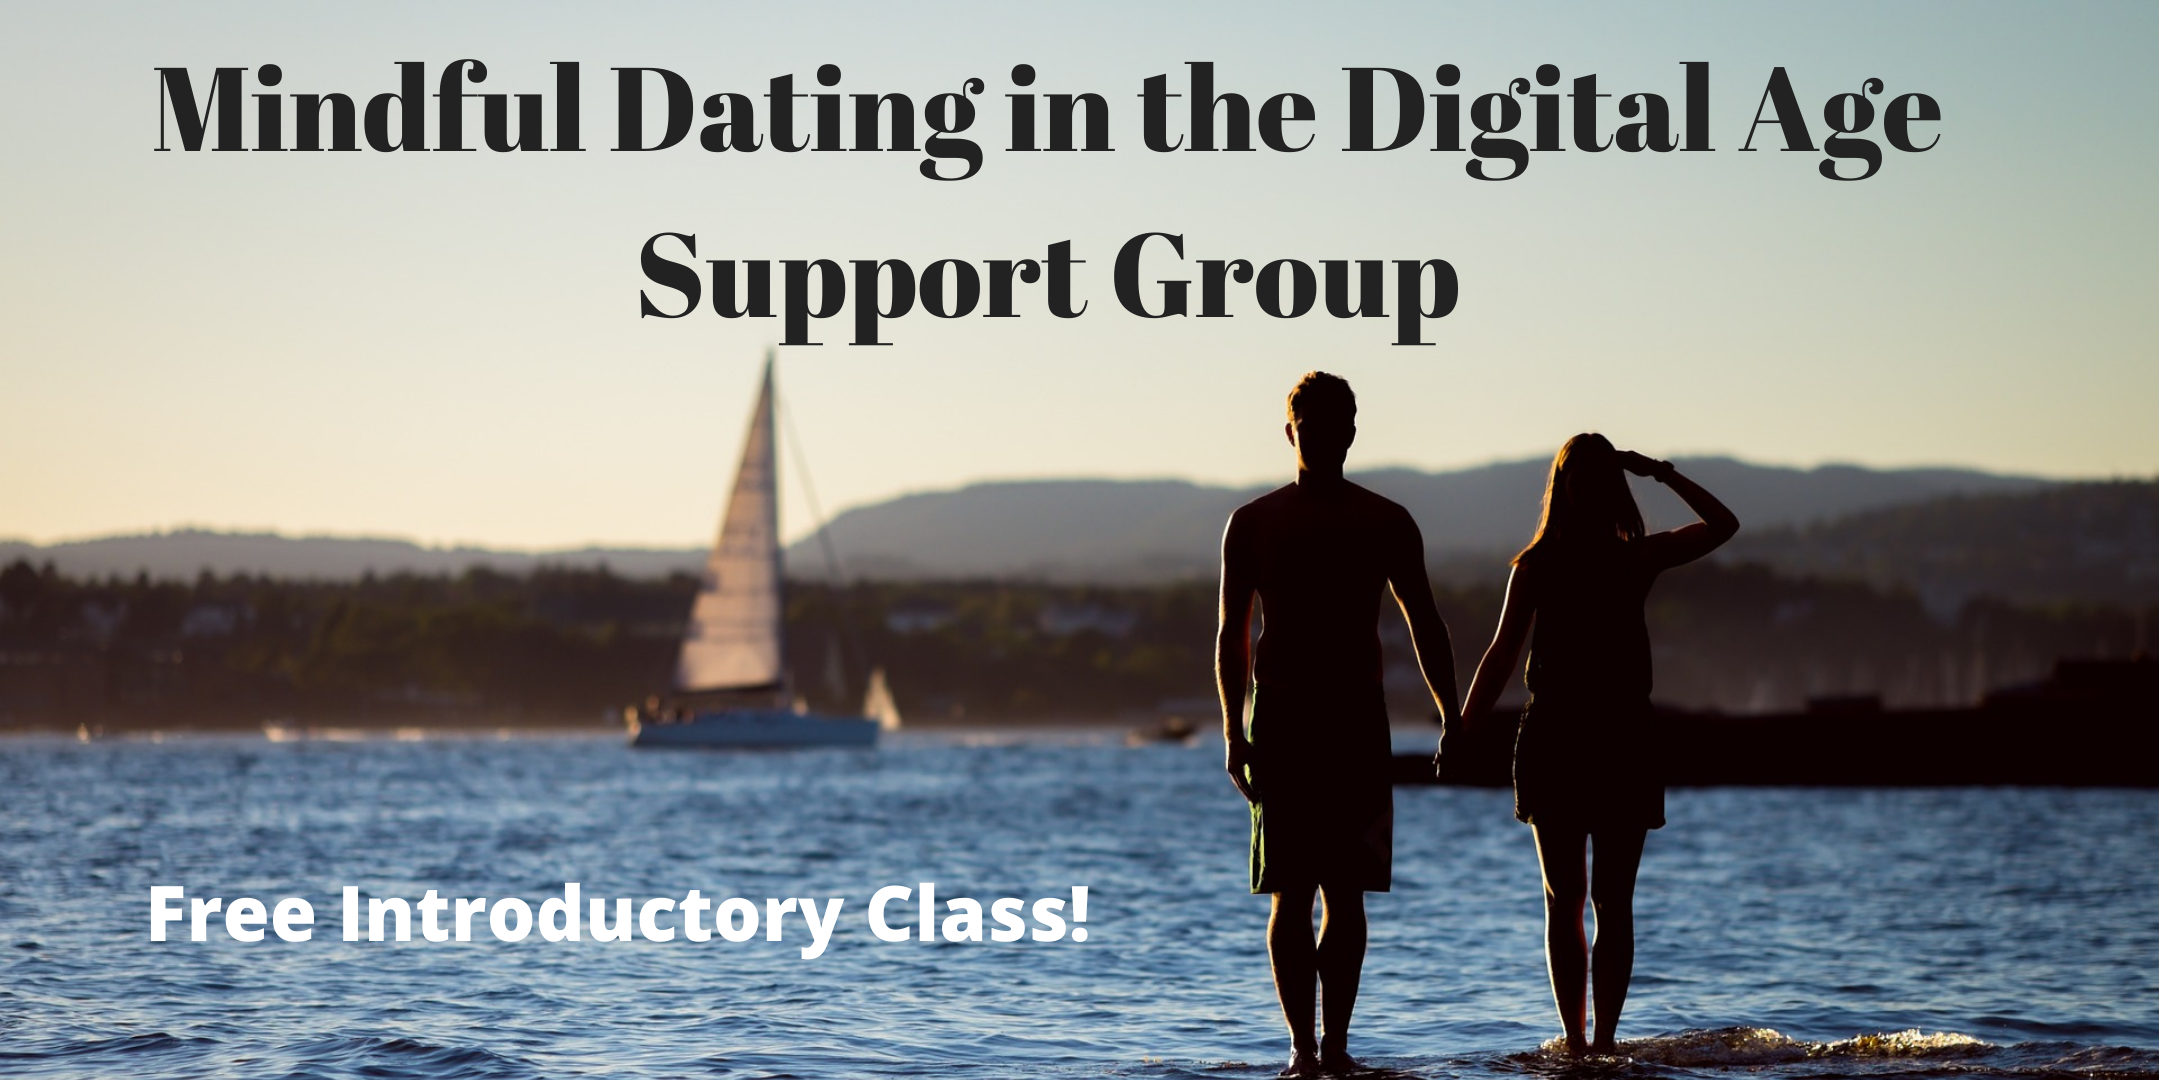 Mindful Dating Support Group - Free Introductory Class